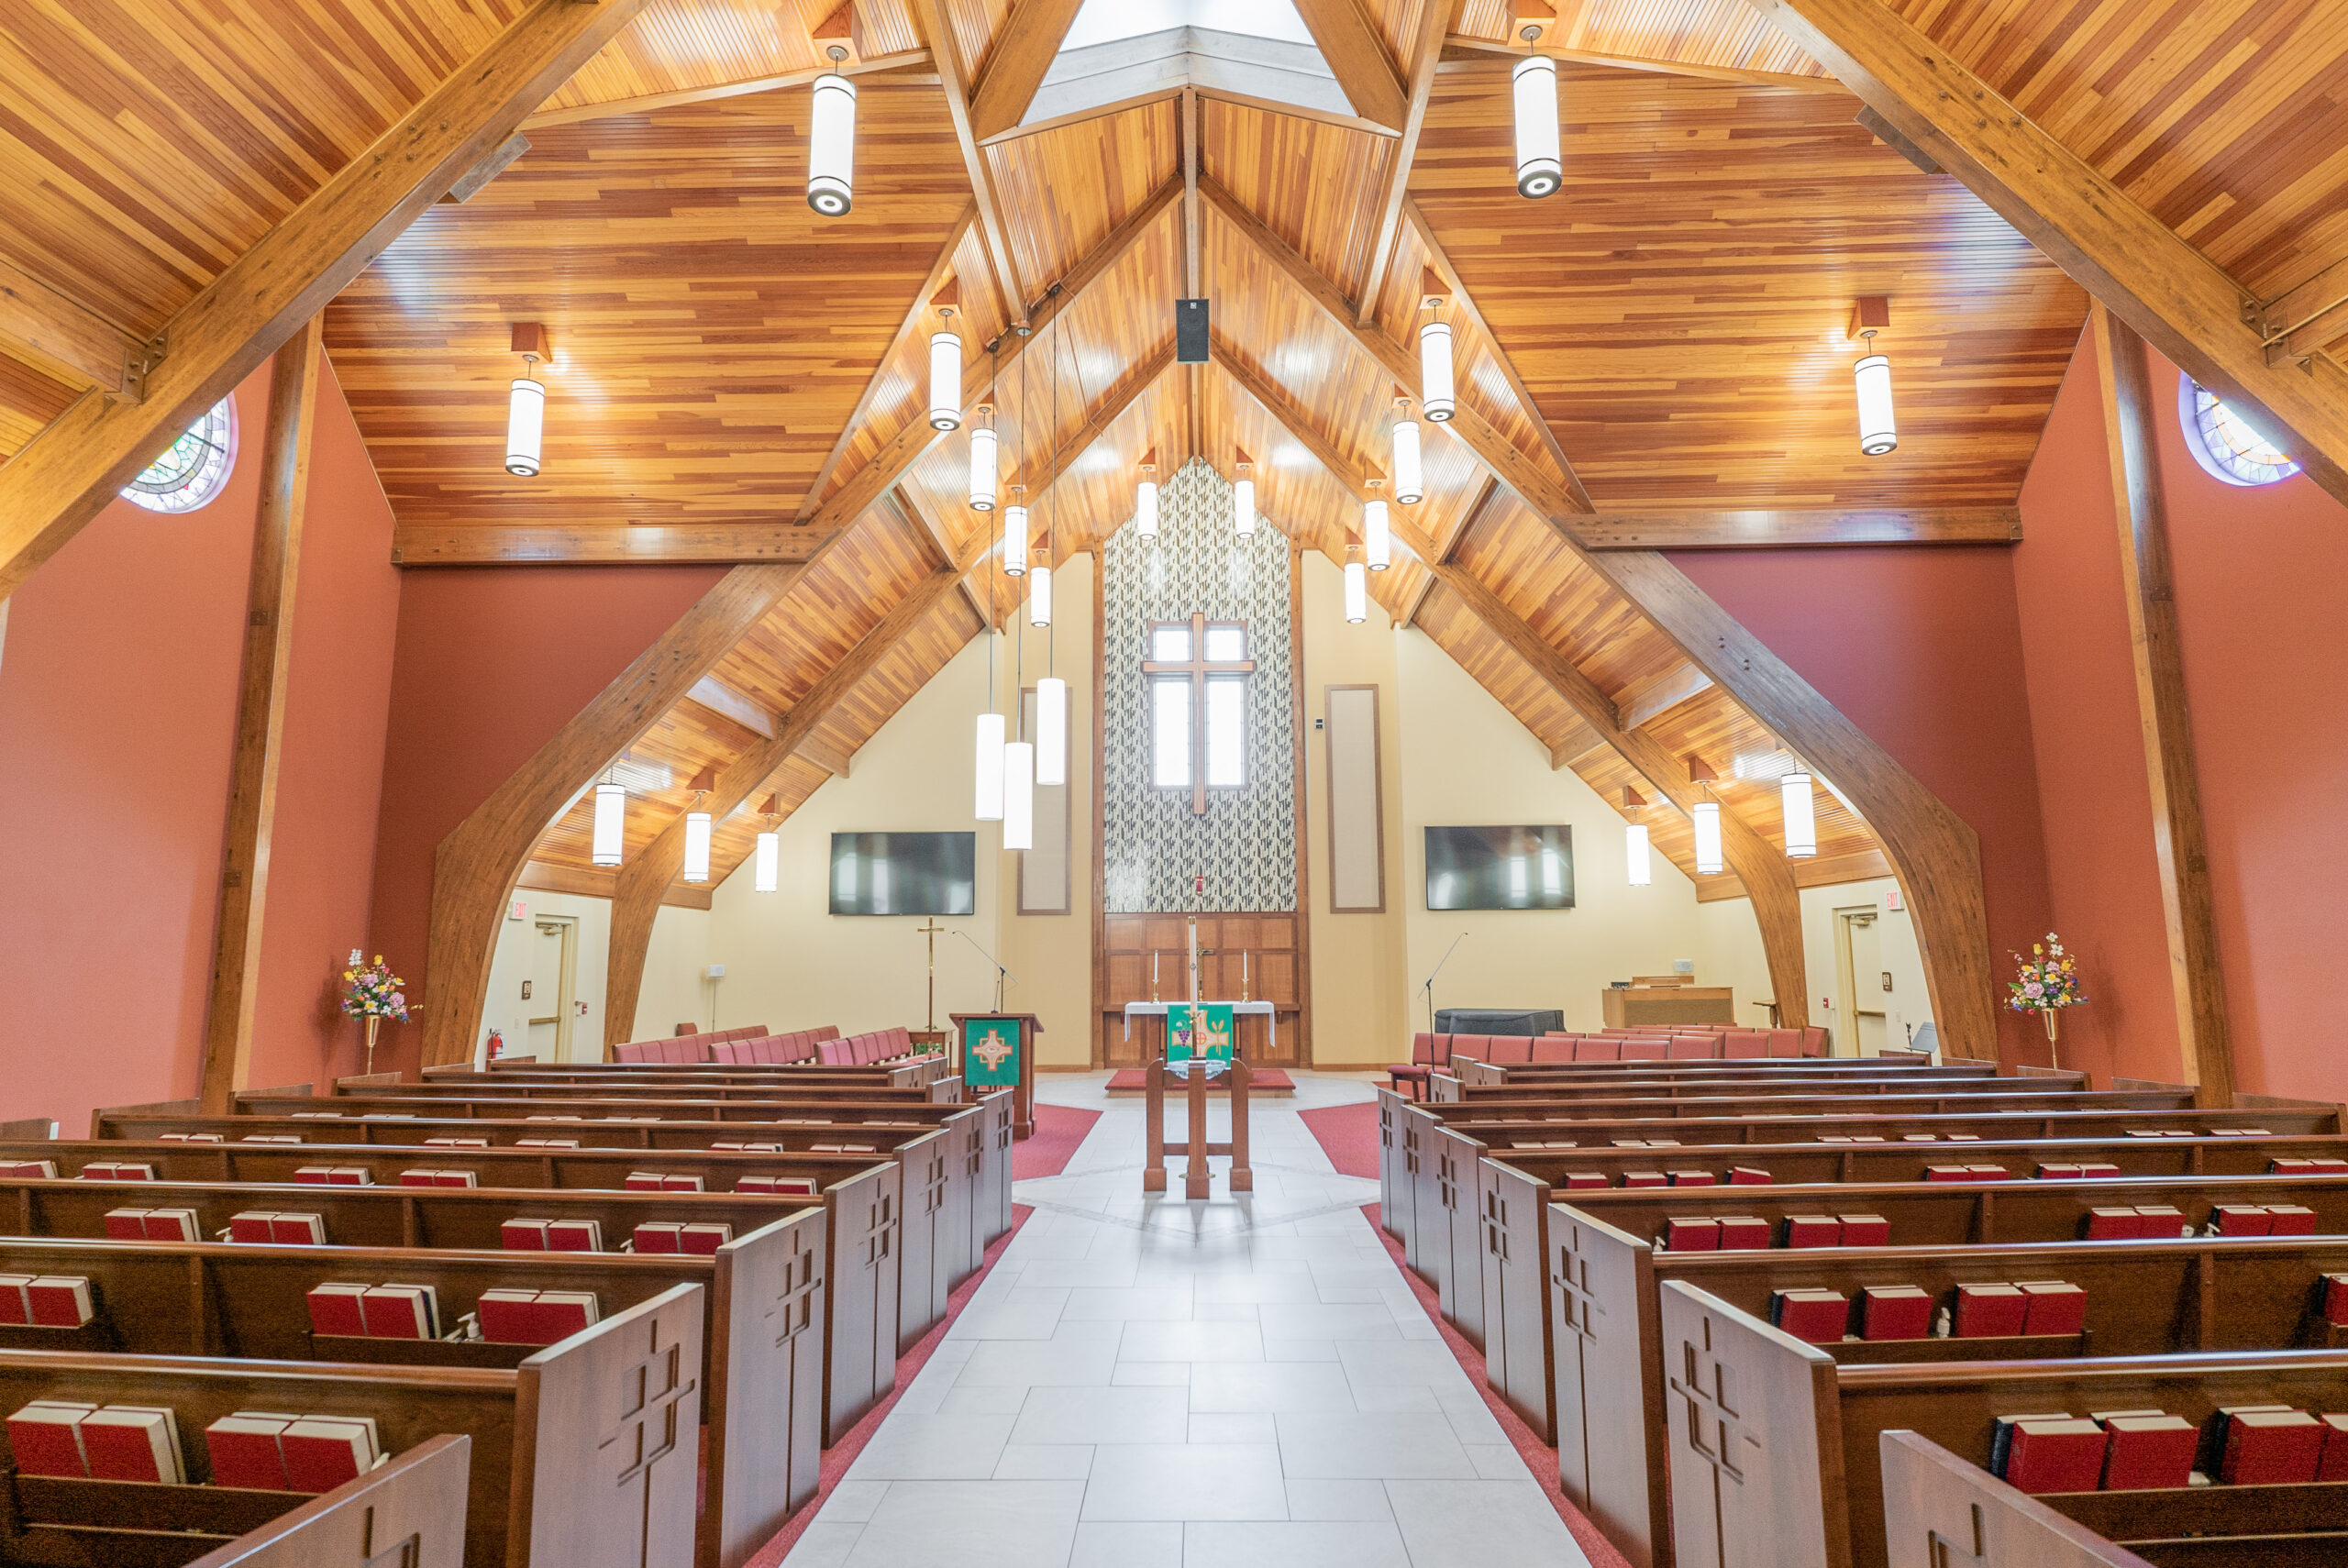 Inside Of A Church With Red Seats And Wooden Ceilings.